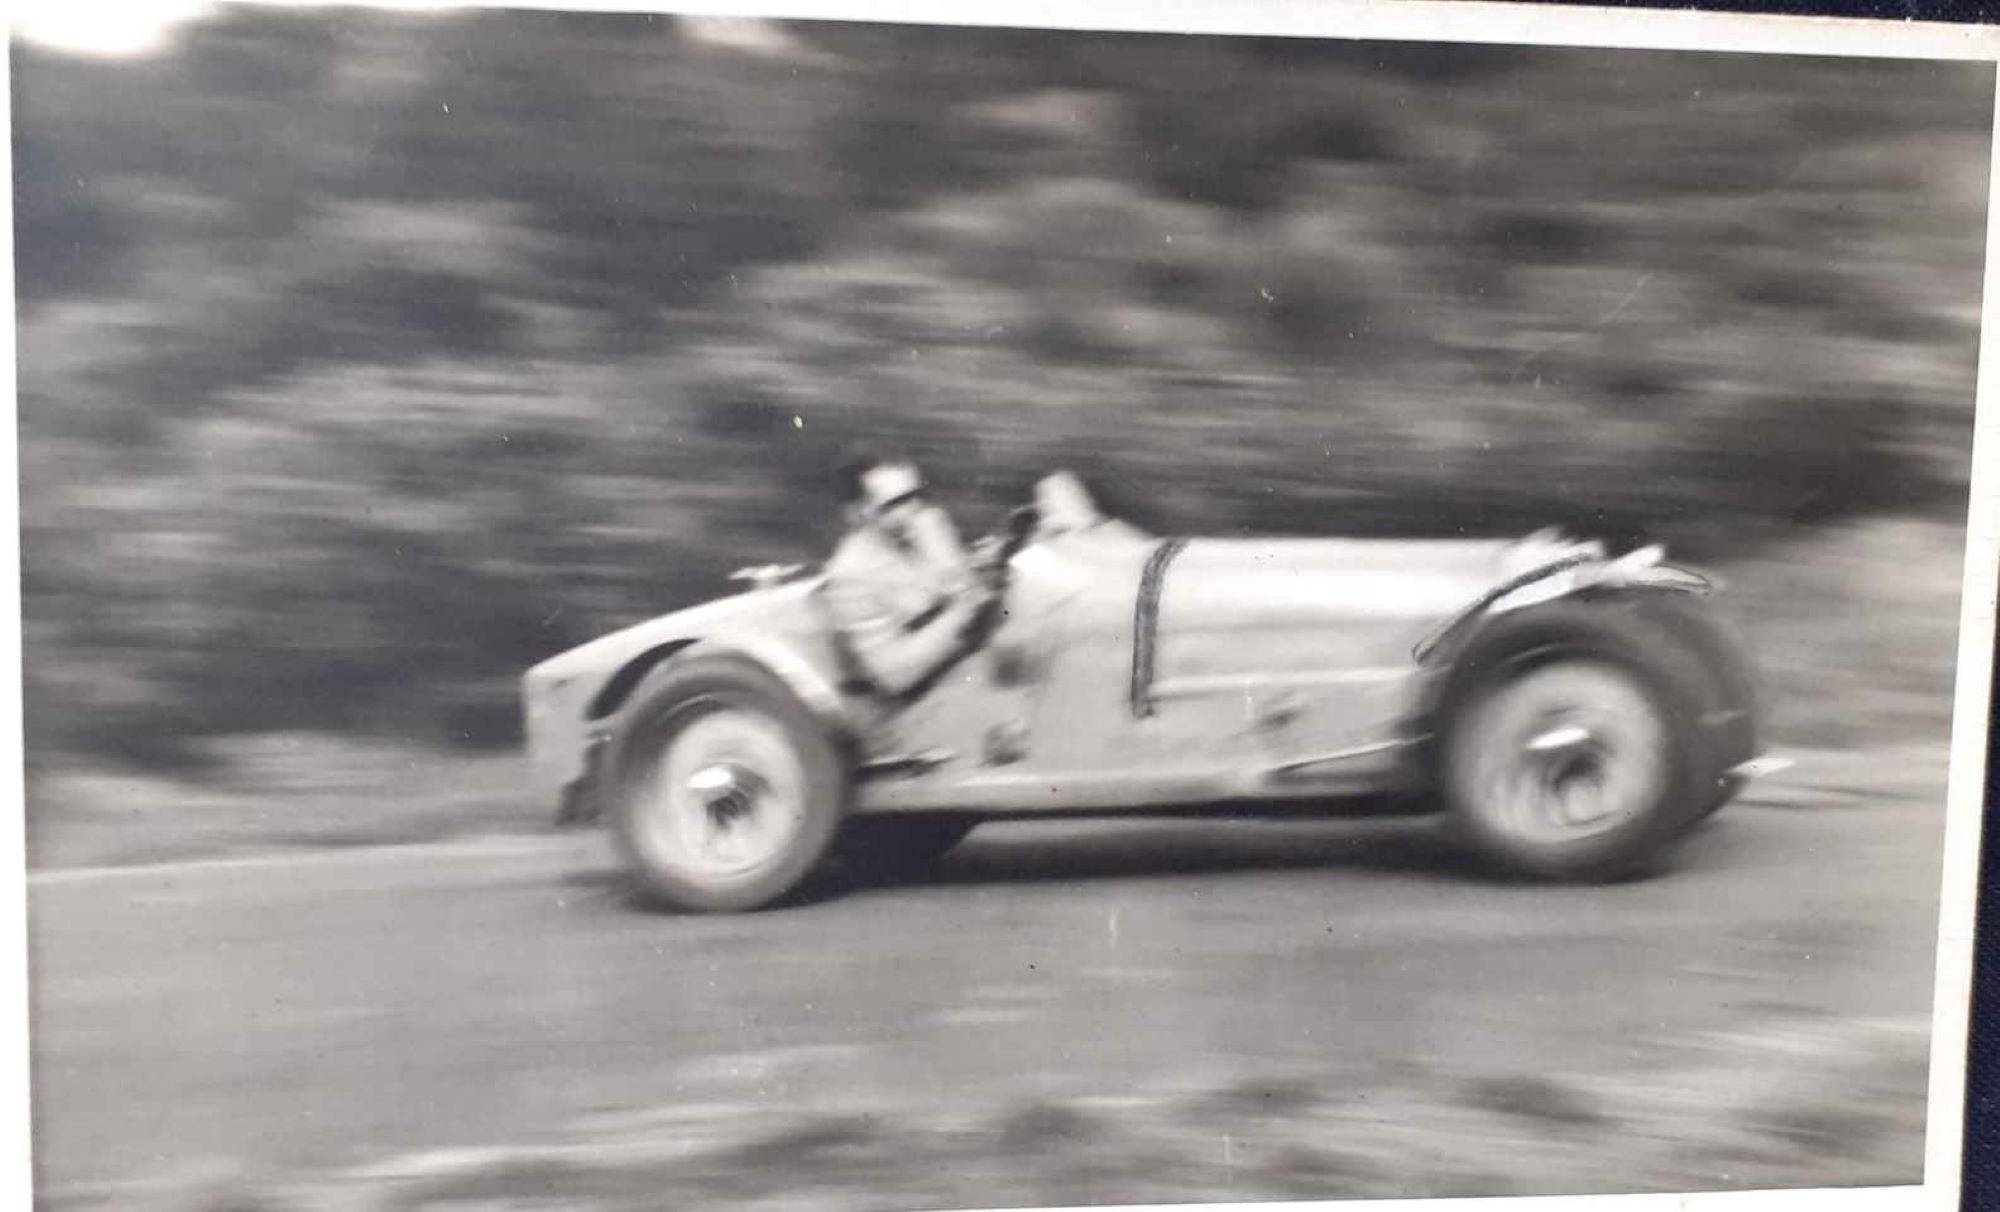 Name:  NSCC 1950 #0116 Bugatti T35 at speed - light colour 1950's - image Graeme Wells arch Anthony Wel.jpg
Views: 214
Size:  158.1 KB